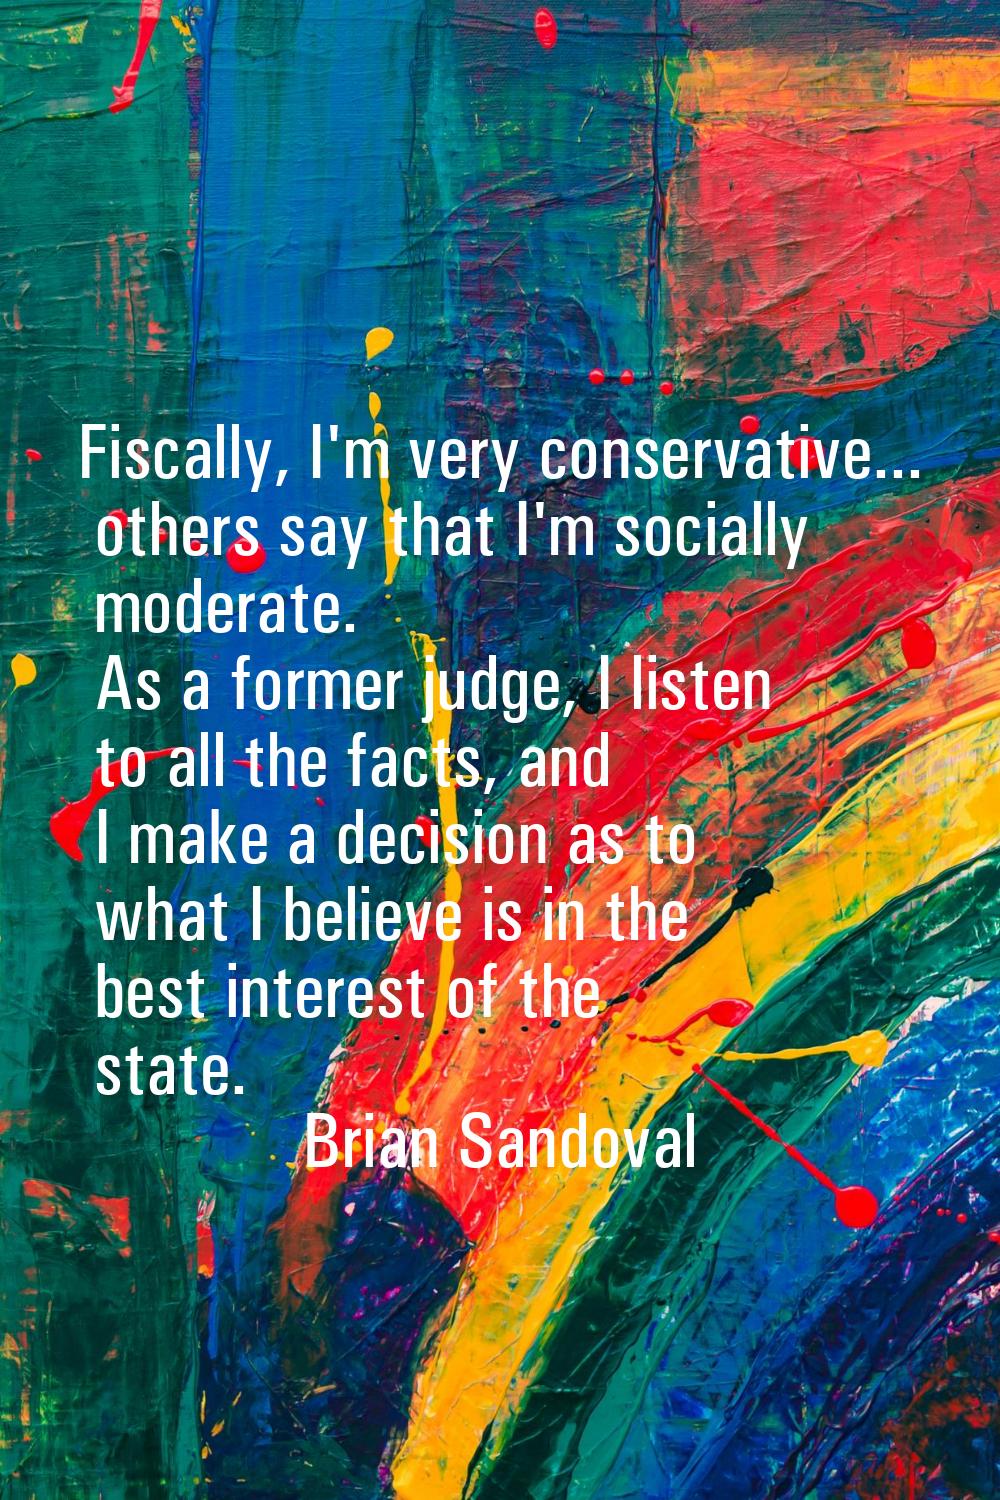 Fiscally, I'm very conservative... others say that I'm socially moderate. As a former judge, I list